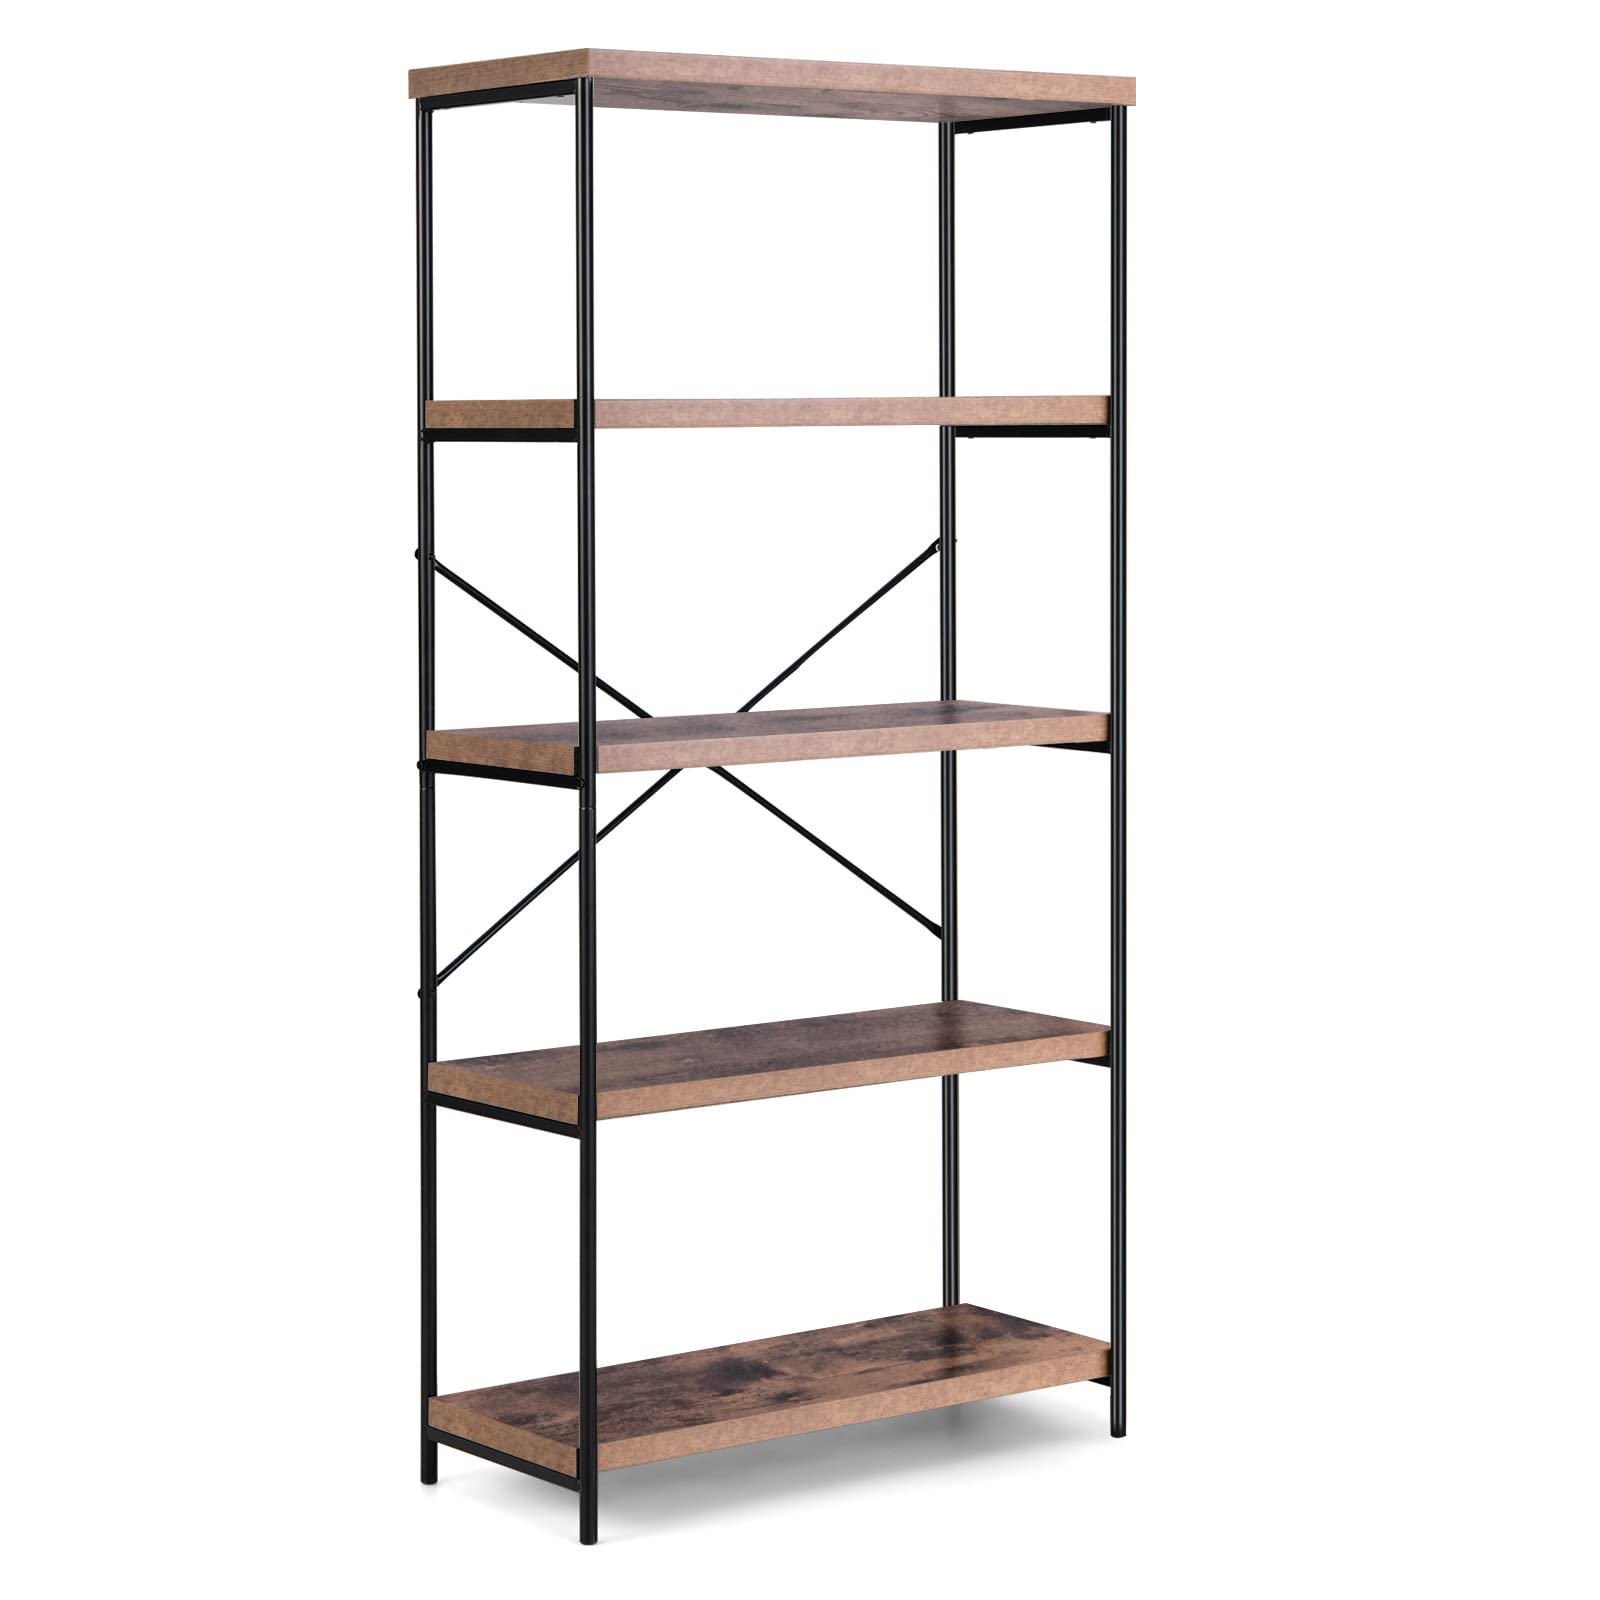 Giantex Industrial 5-Tier Wood Bookshelf - 63’’ Tall Open Storage Organizer Shelves with Anti-Tipping Device and Foot Pads